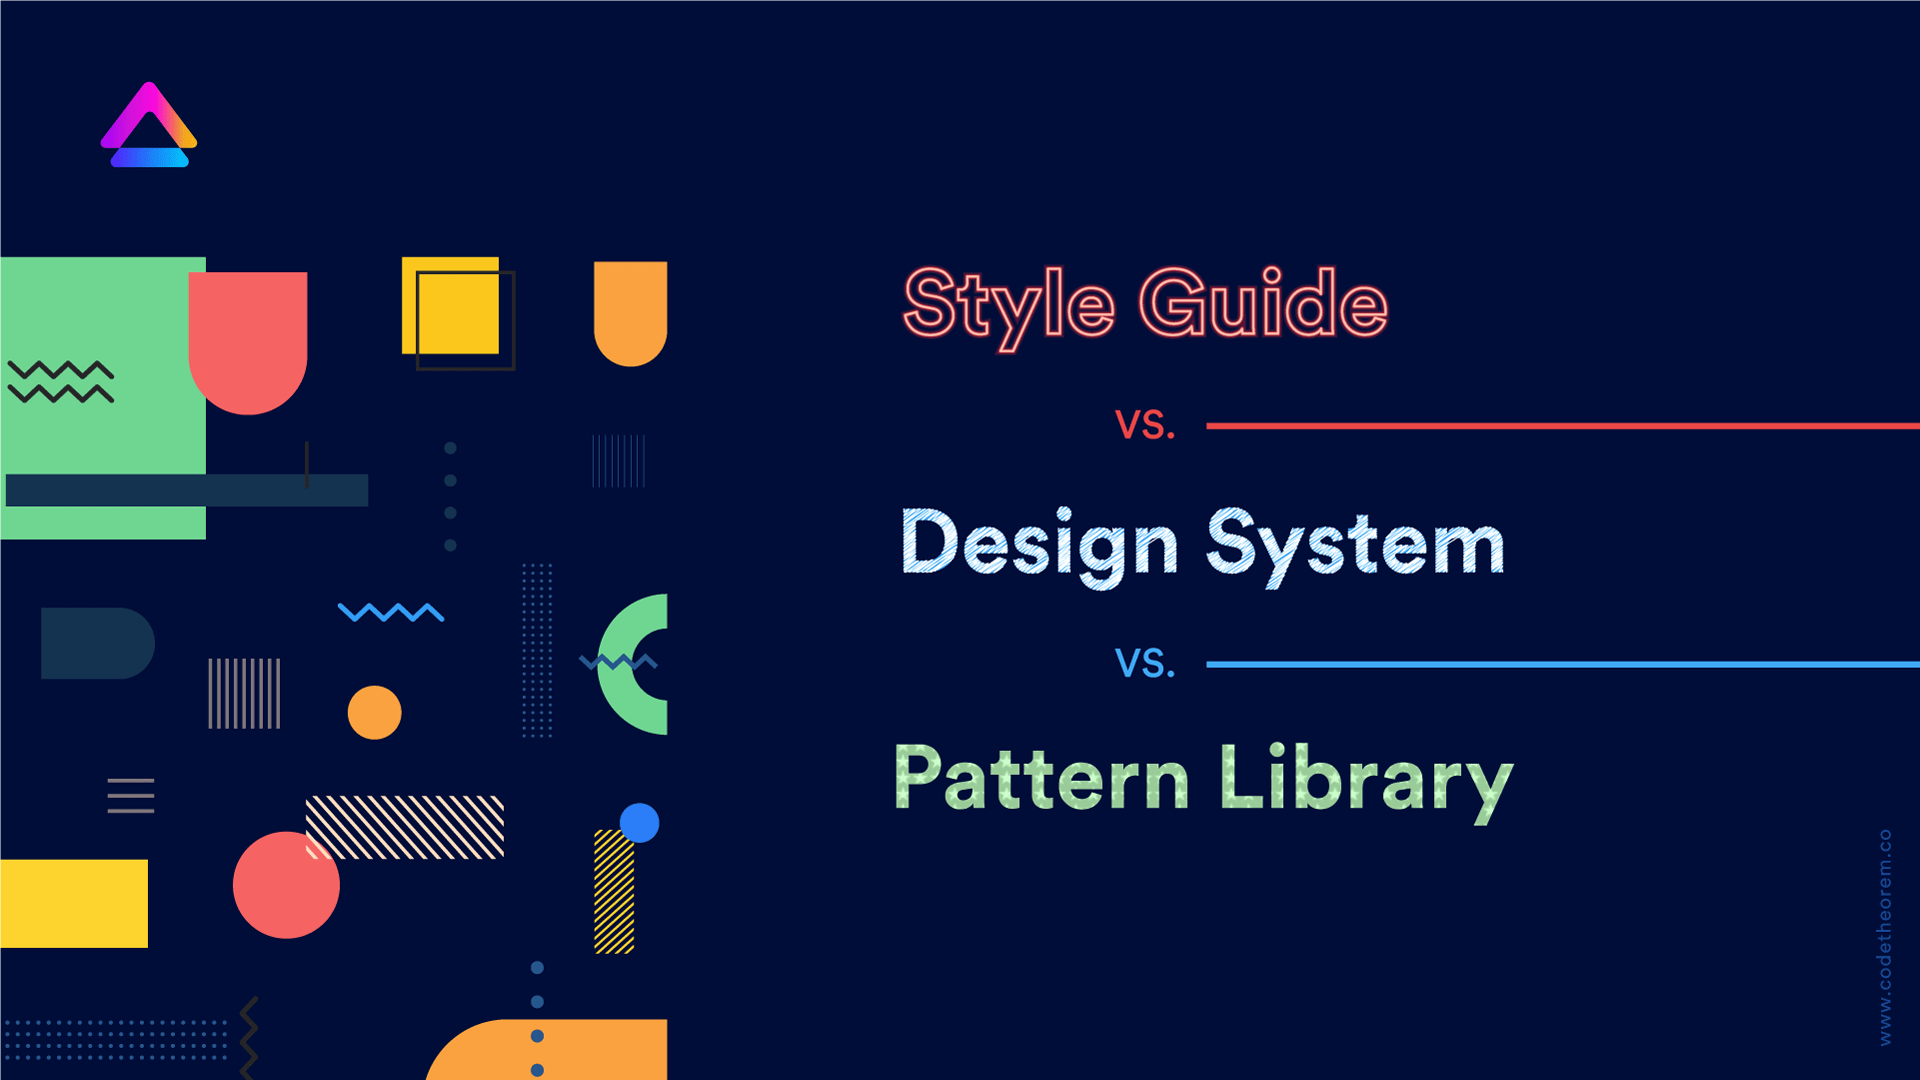 https://codetheorem.co/blogs/wp-content/uploads/2021/10/Style-Guide-Vs-Design-System-Vs-Pattern-Library-%E2%80%93-The-Ultimate-Guide-for-2021.png